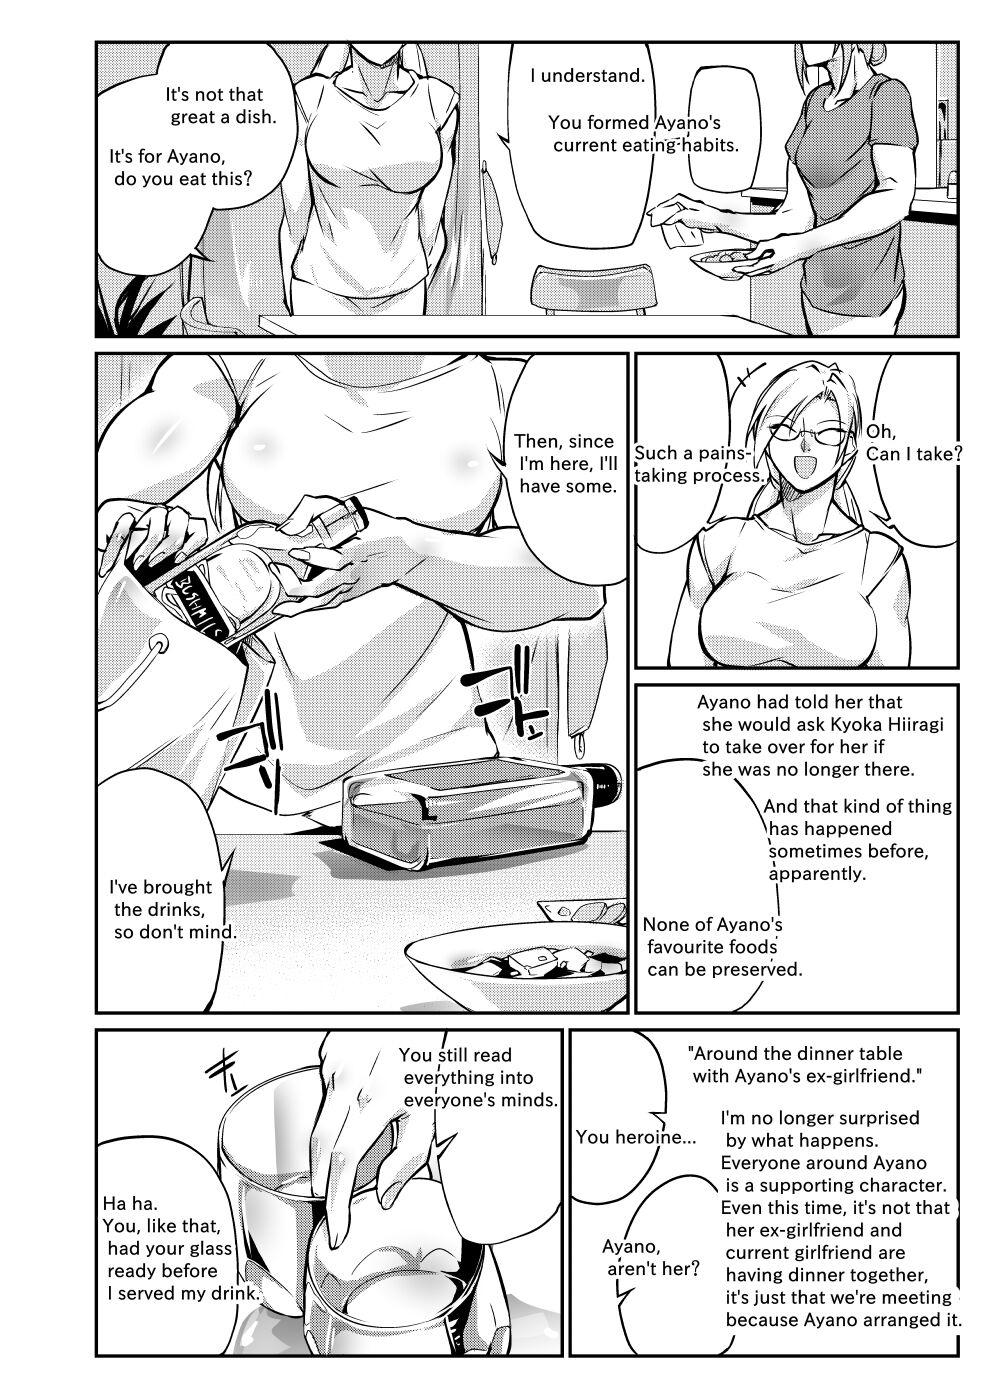 Old Vs Young Tougijou Rin - Arena Rin 5 - Original Dirty Talk - Page 11